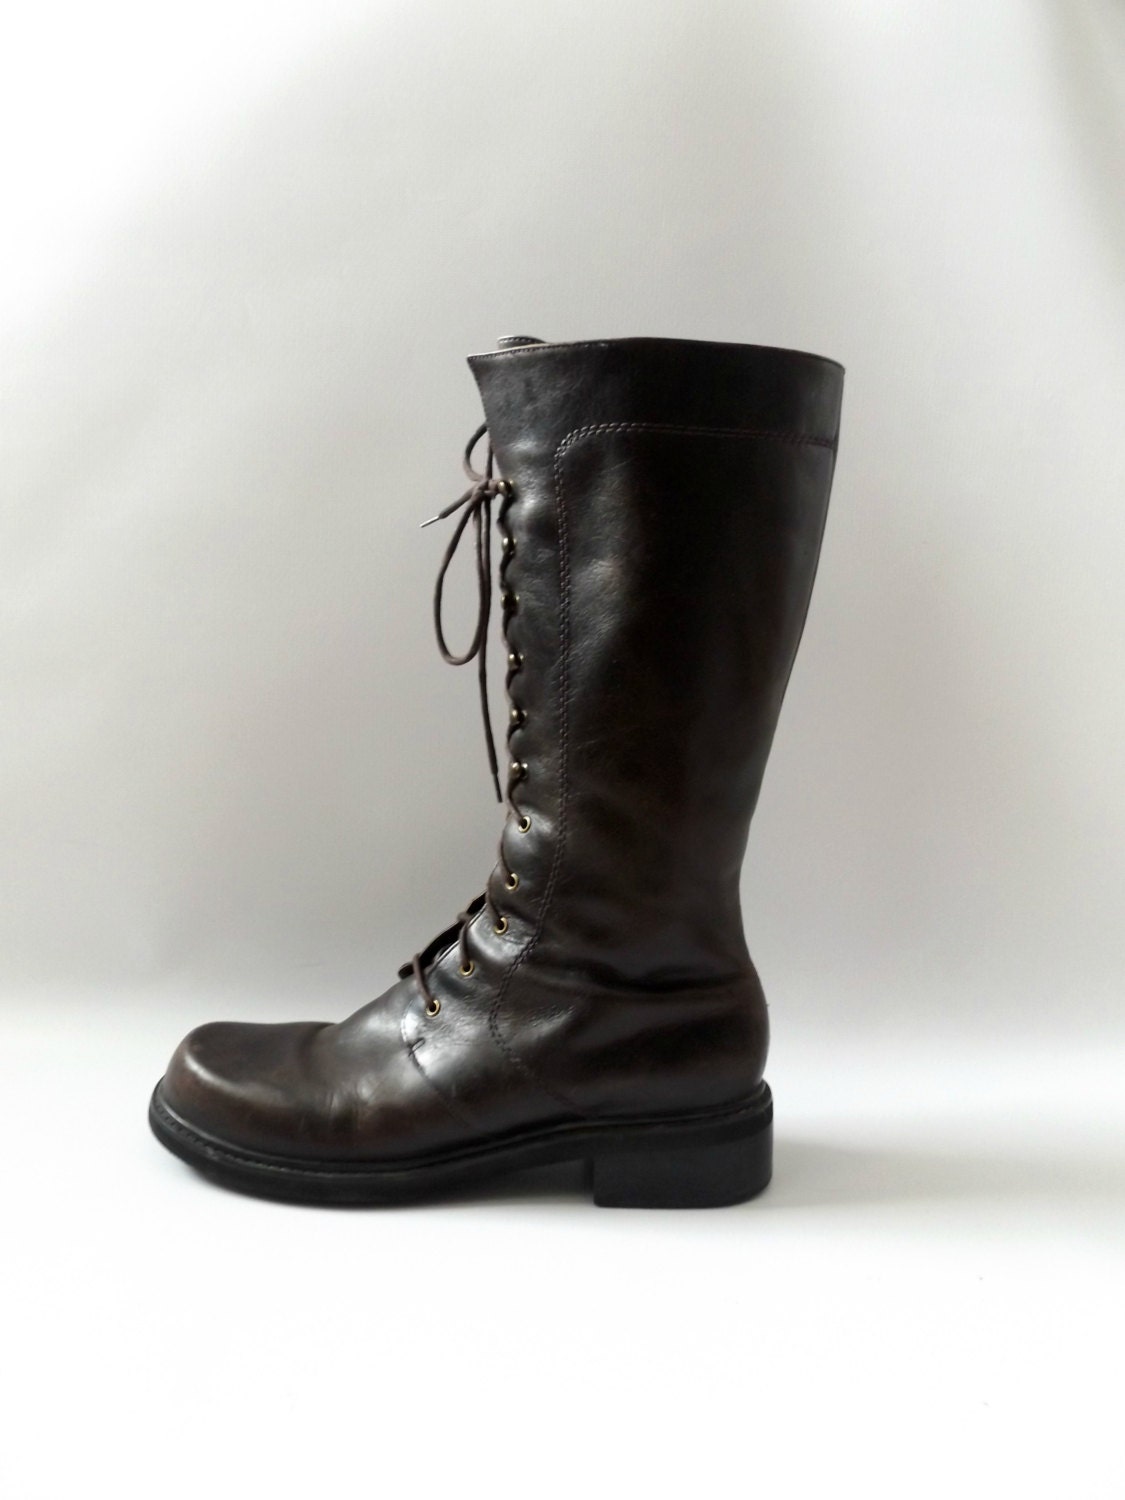 Tall Lace Up Riding Boots Size US Womens 12 Vintage Eddie